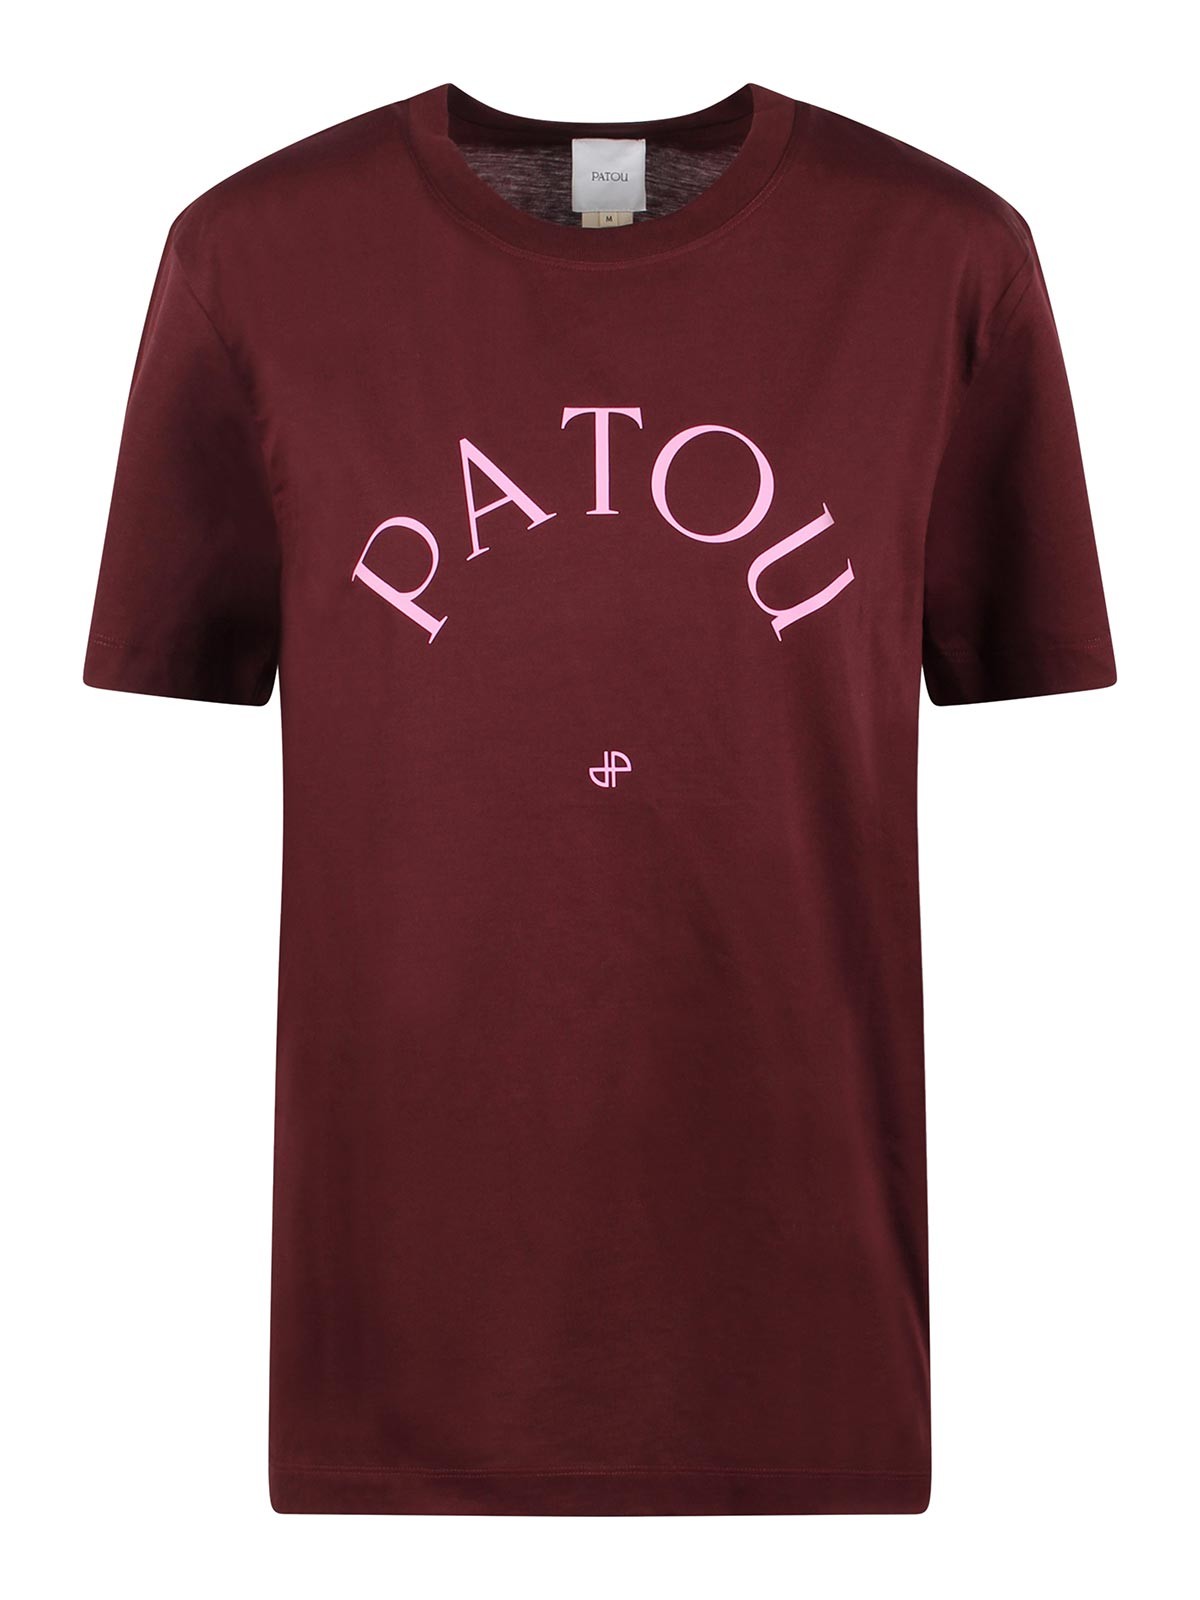 Patou T-shirt With Print In Red